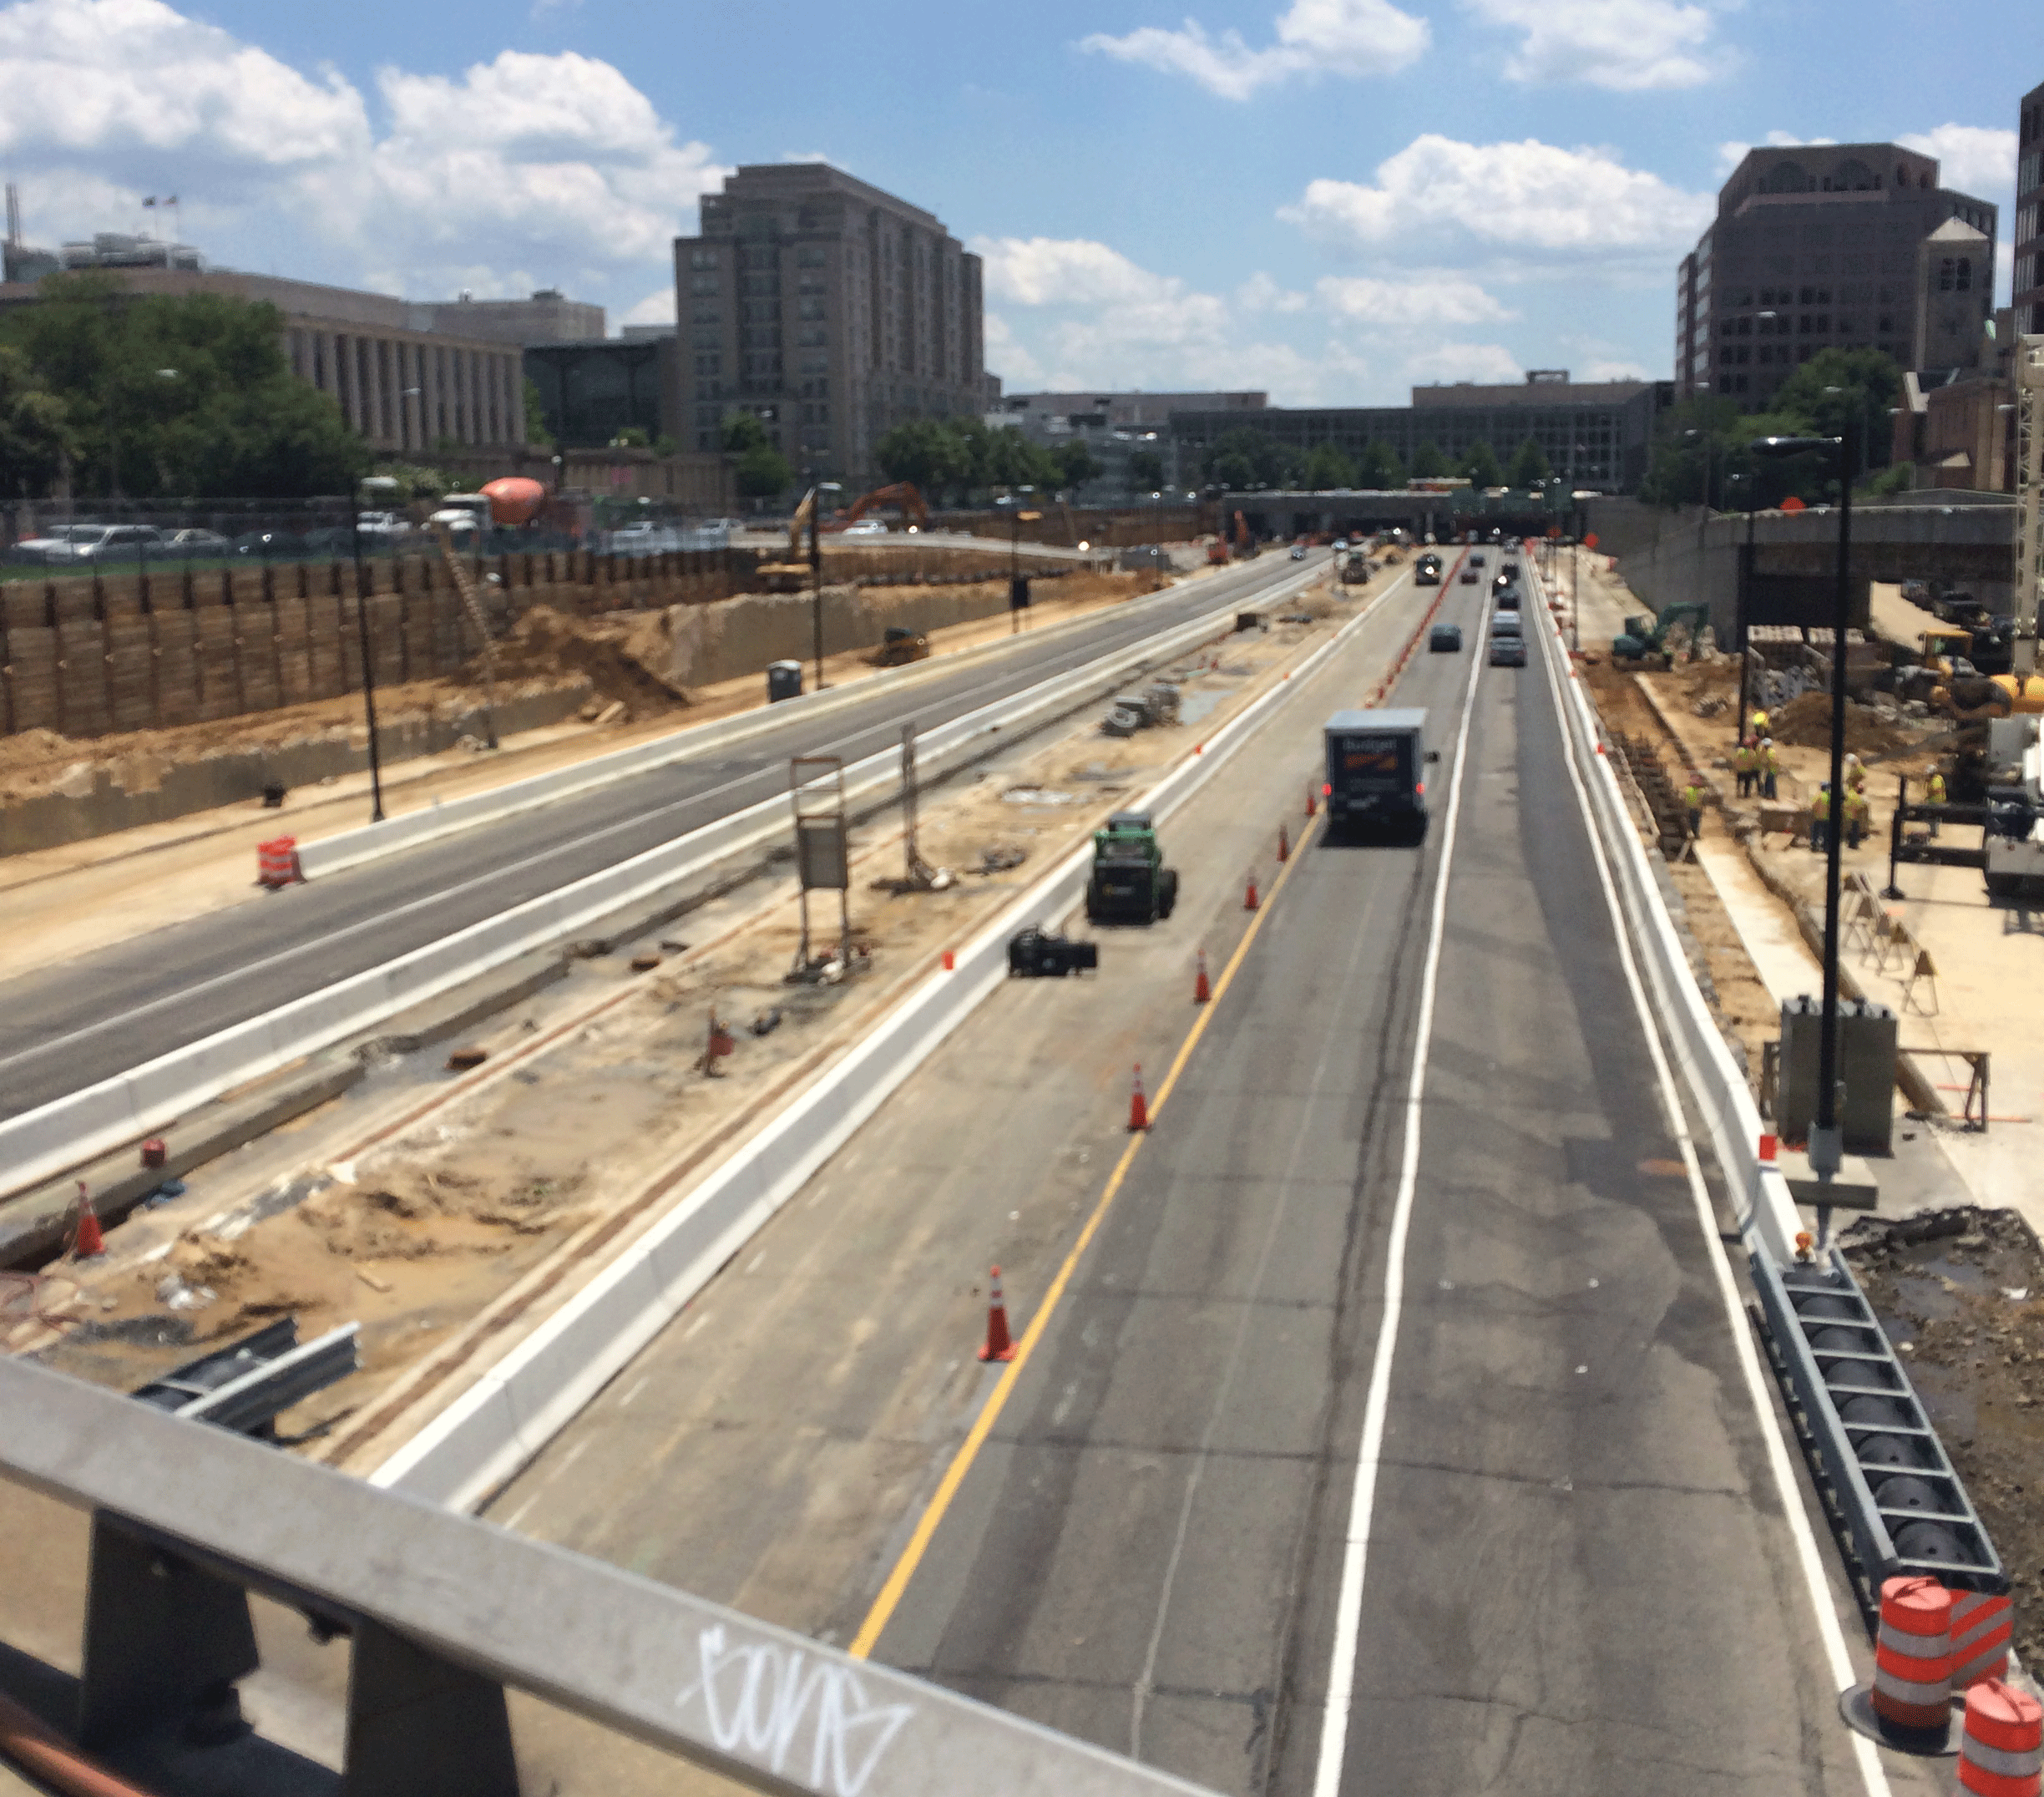 New phase of 3rd Street Tunnel project brings lane closures